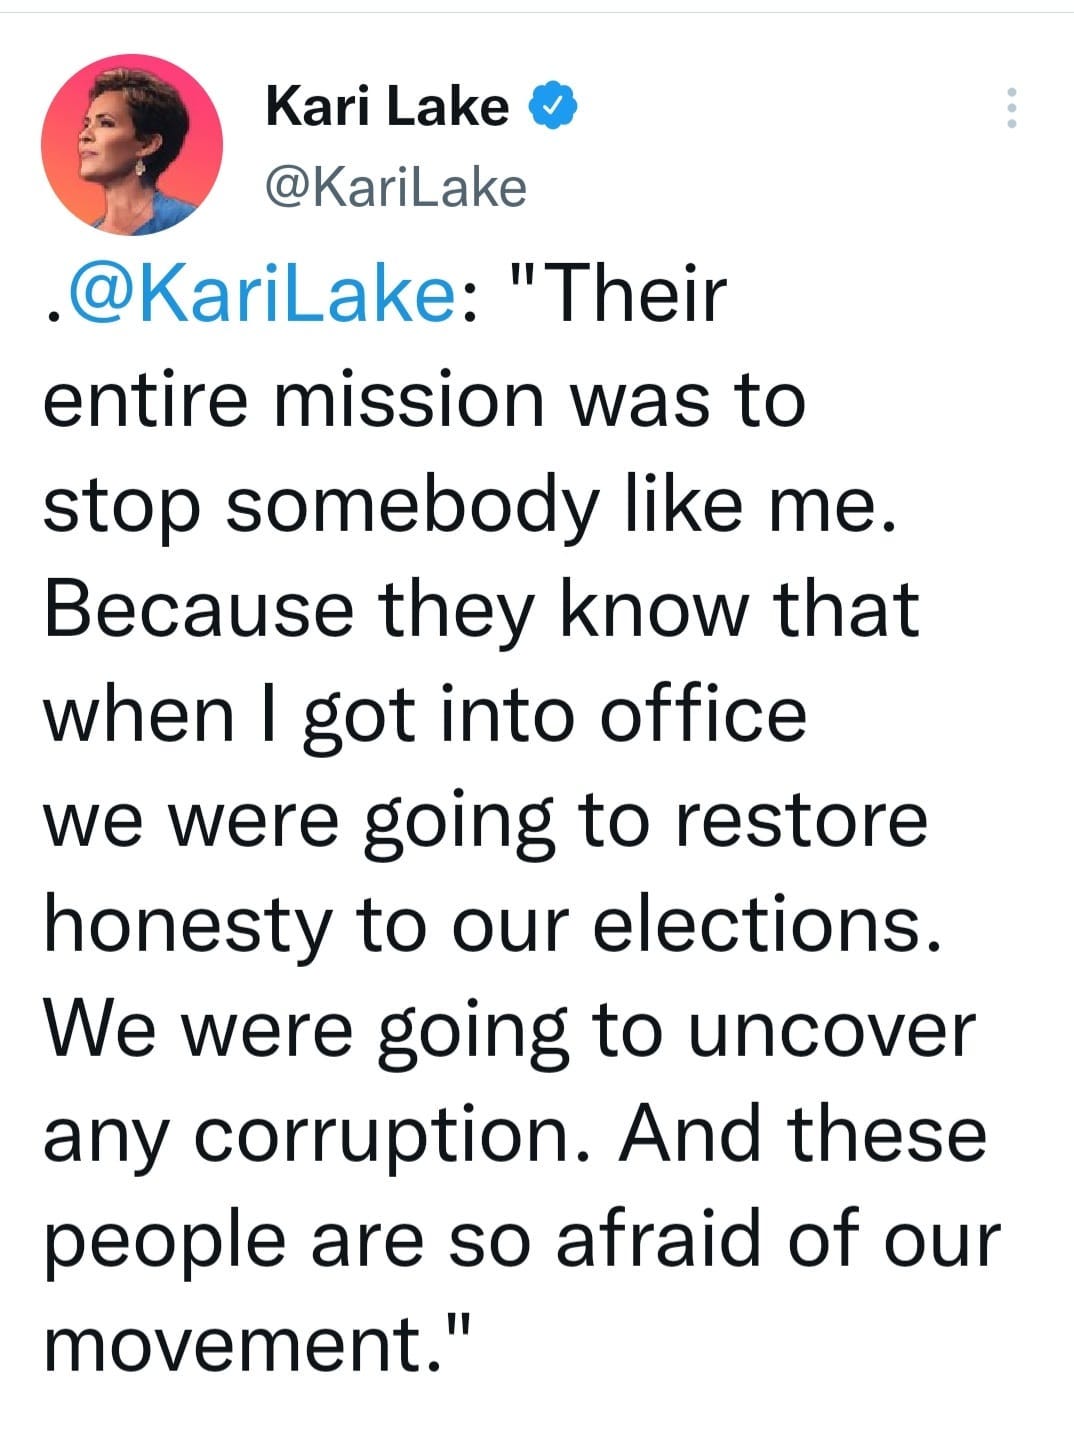 May be a Twitter screenshot of 1 person and text that says 'Kari Lake @KariLake @KariLake: "Their entire mission was to stop somebody like me. Because they know that when I got into office we were going to restore honesty to our elections. We were going to uncover any corruption. And these people are so afraid of our movement."'